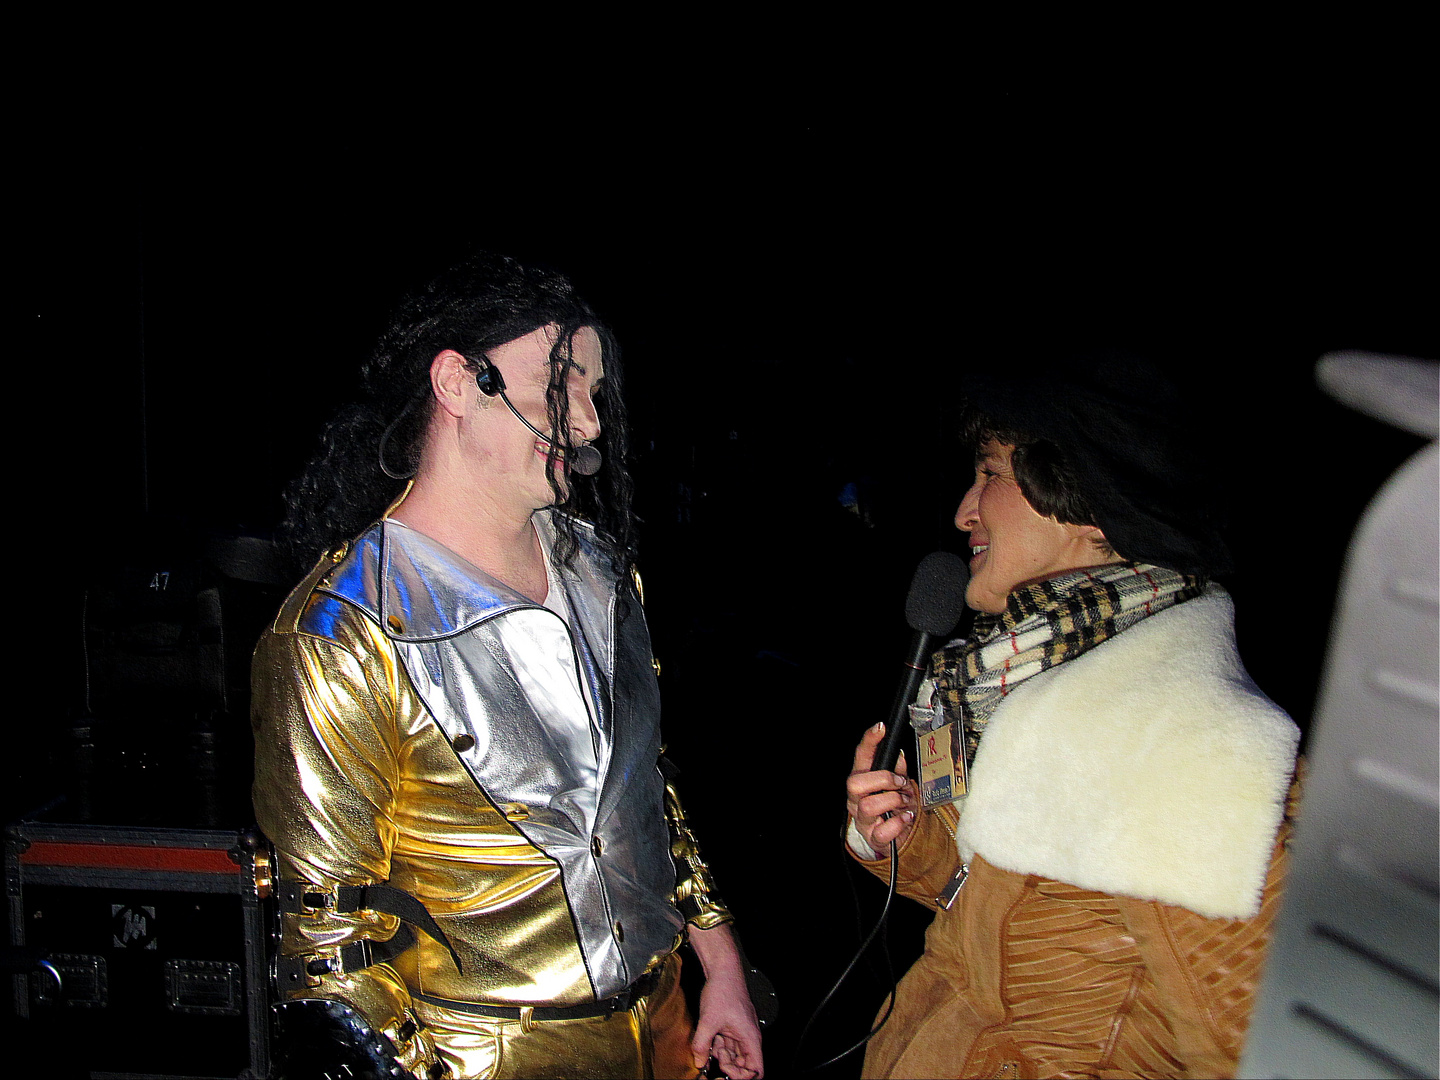 MOONWALKER - "A TRIBUTE TO THE KING OF POP"